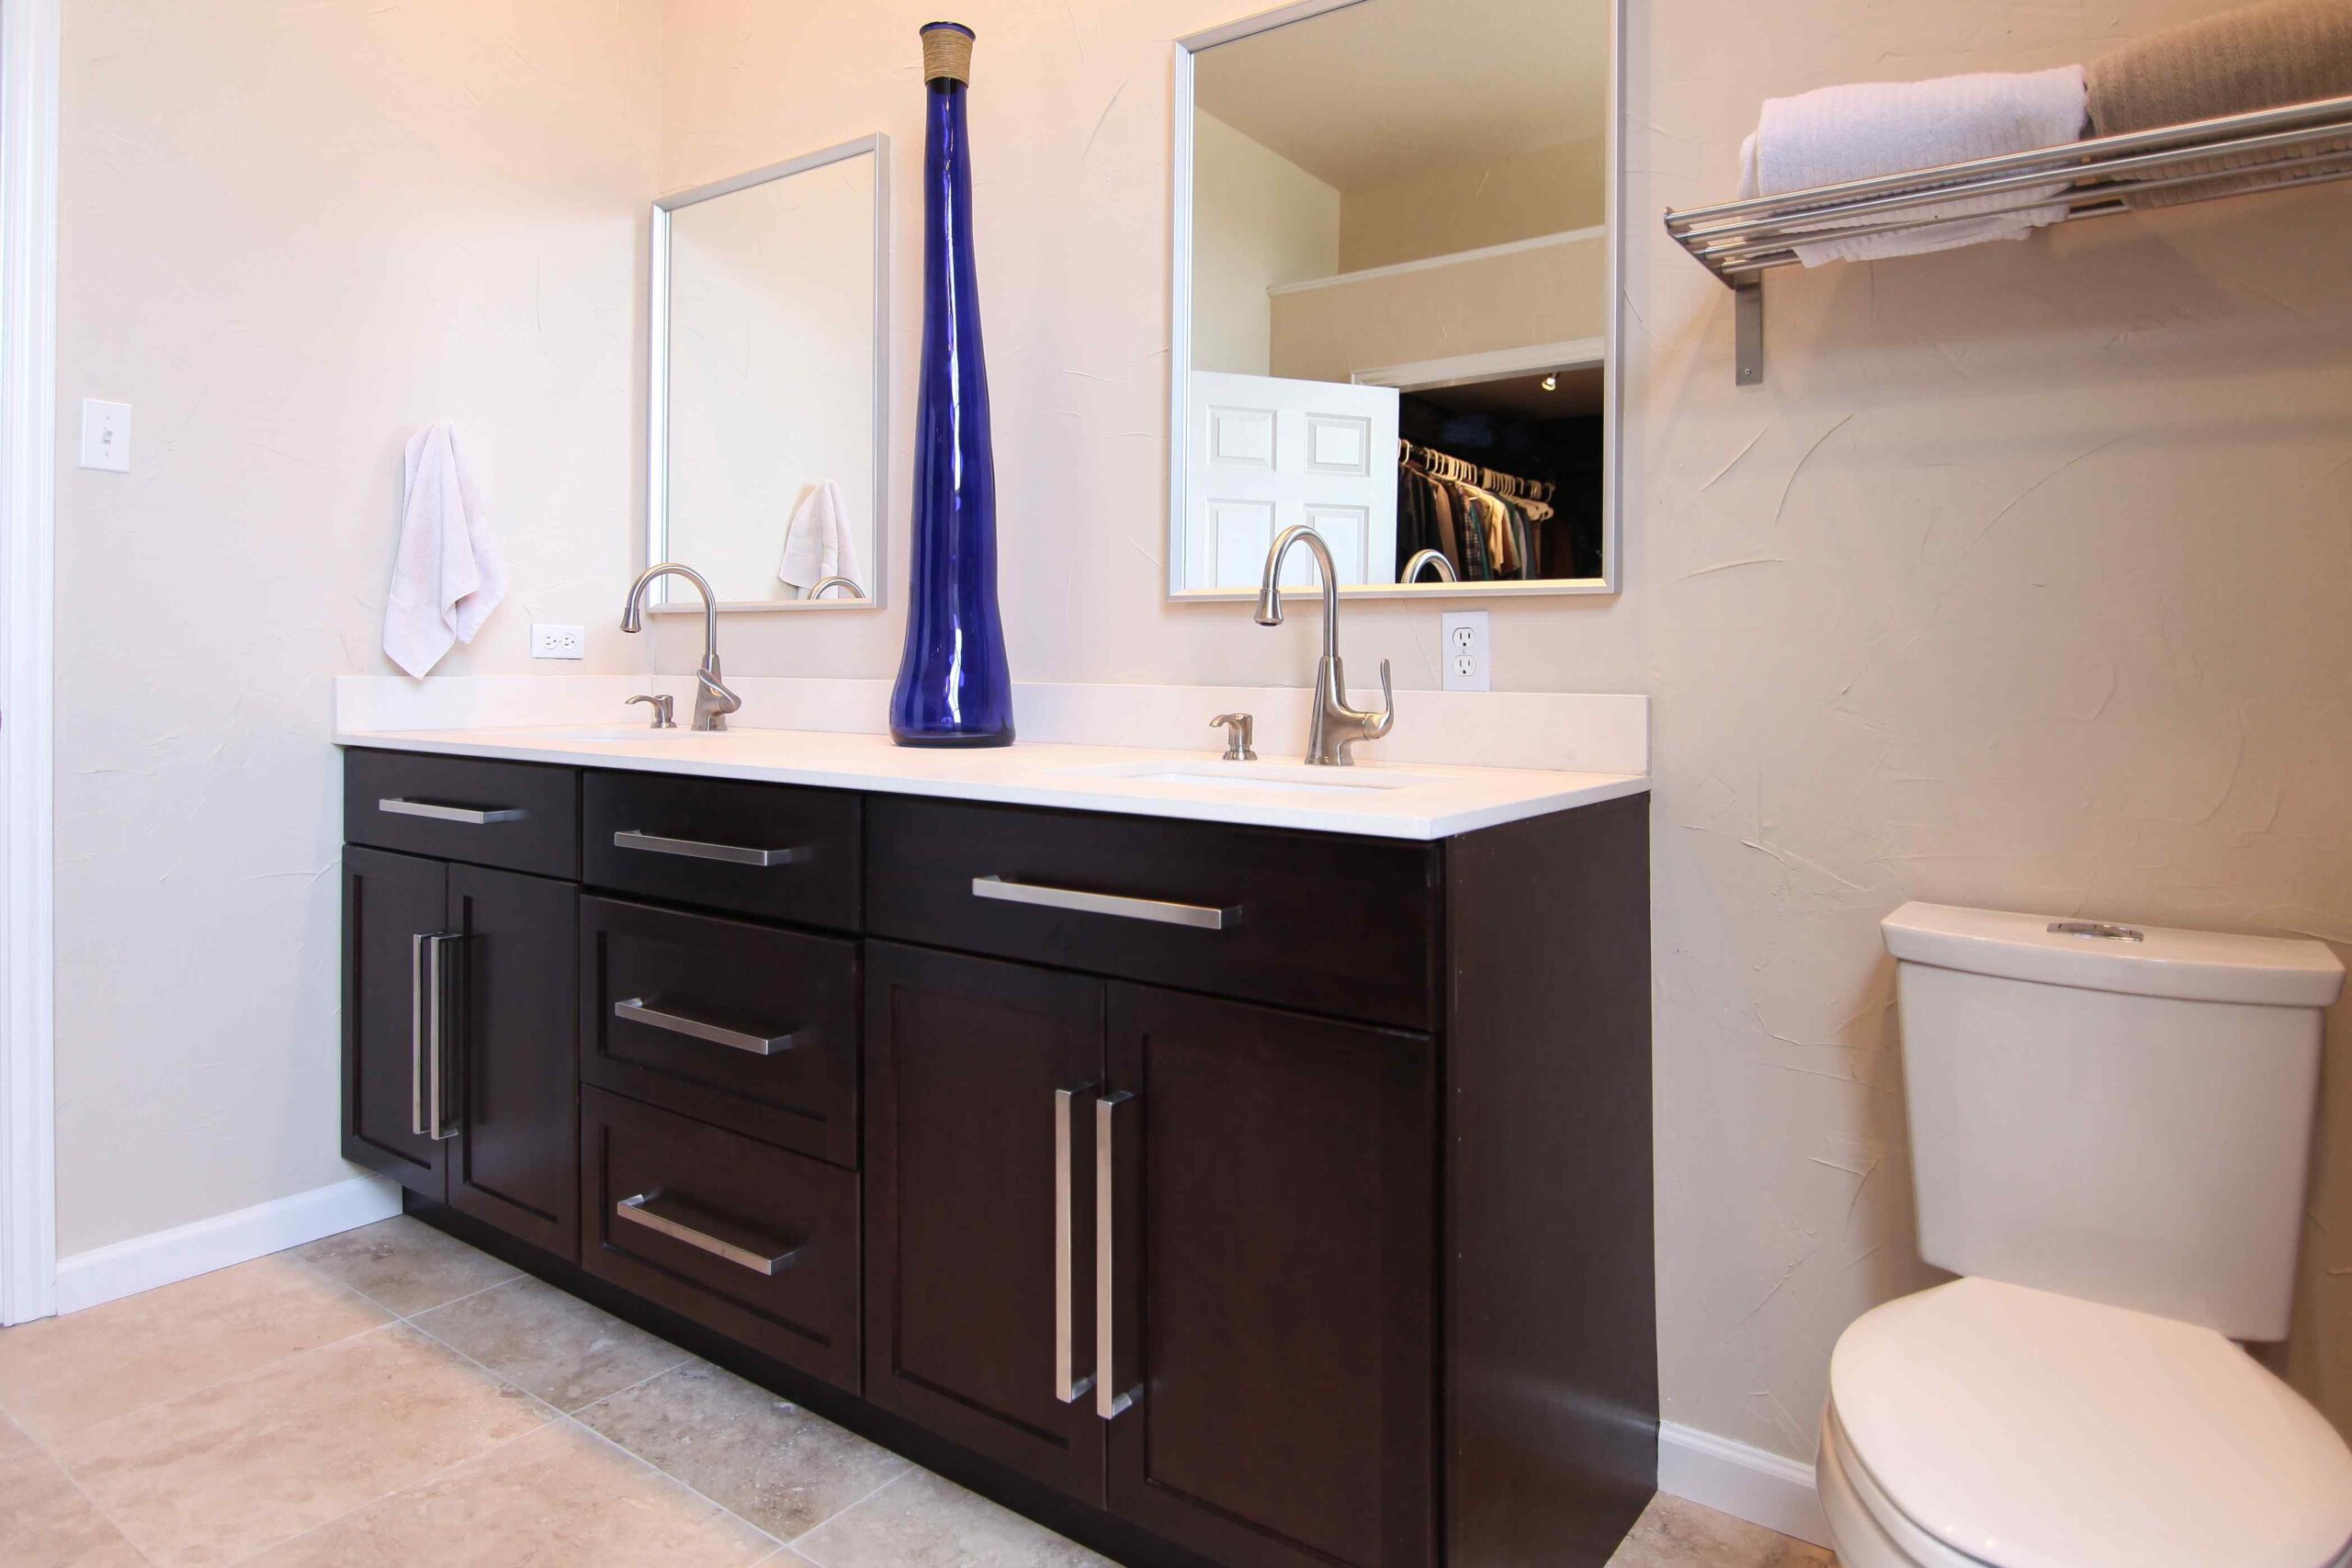 Bathrooms mahogany cabinets - Also offers Basement Renovation in Flower Mound TX